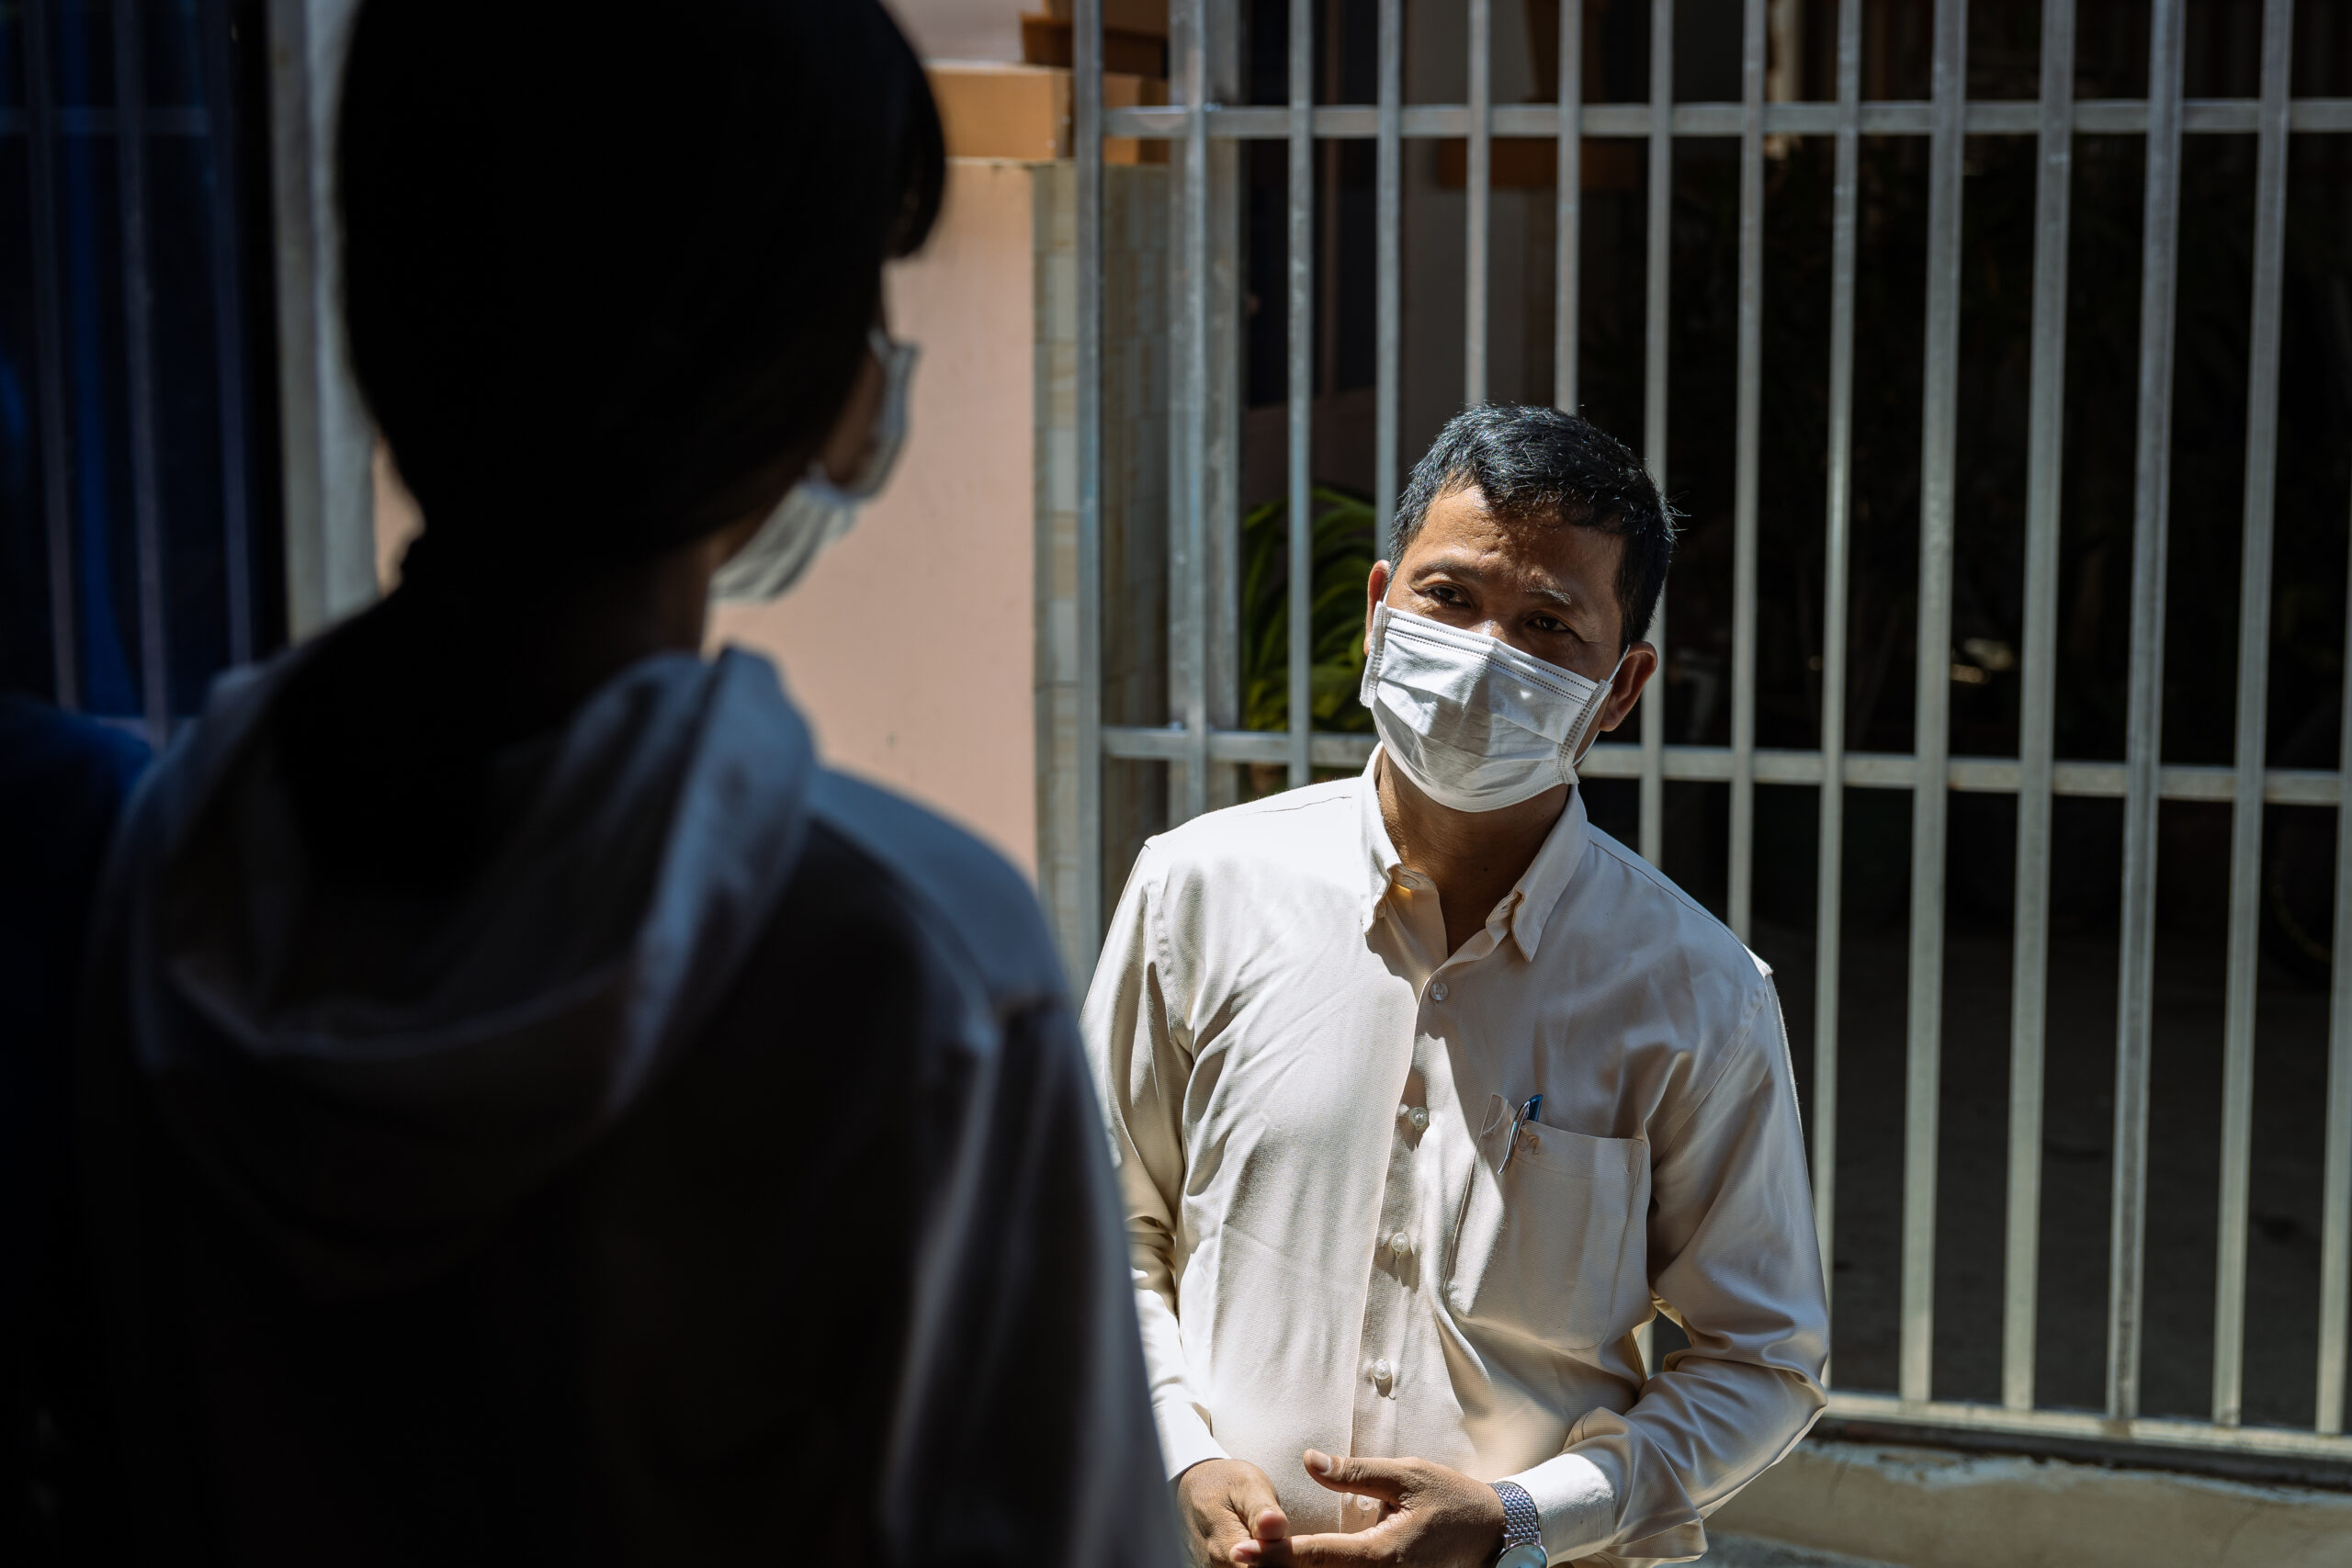 A social service worker speaks with a child in Cambodia while wearing a COVID-19 mask.